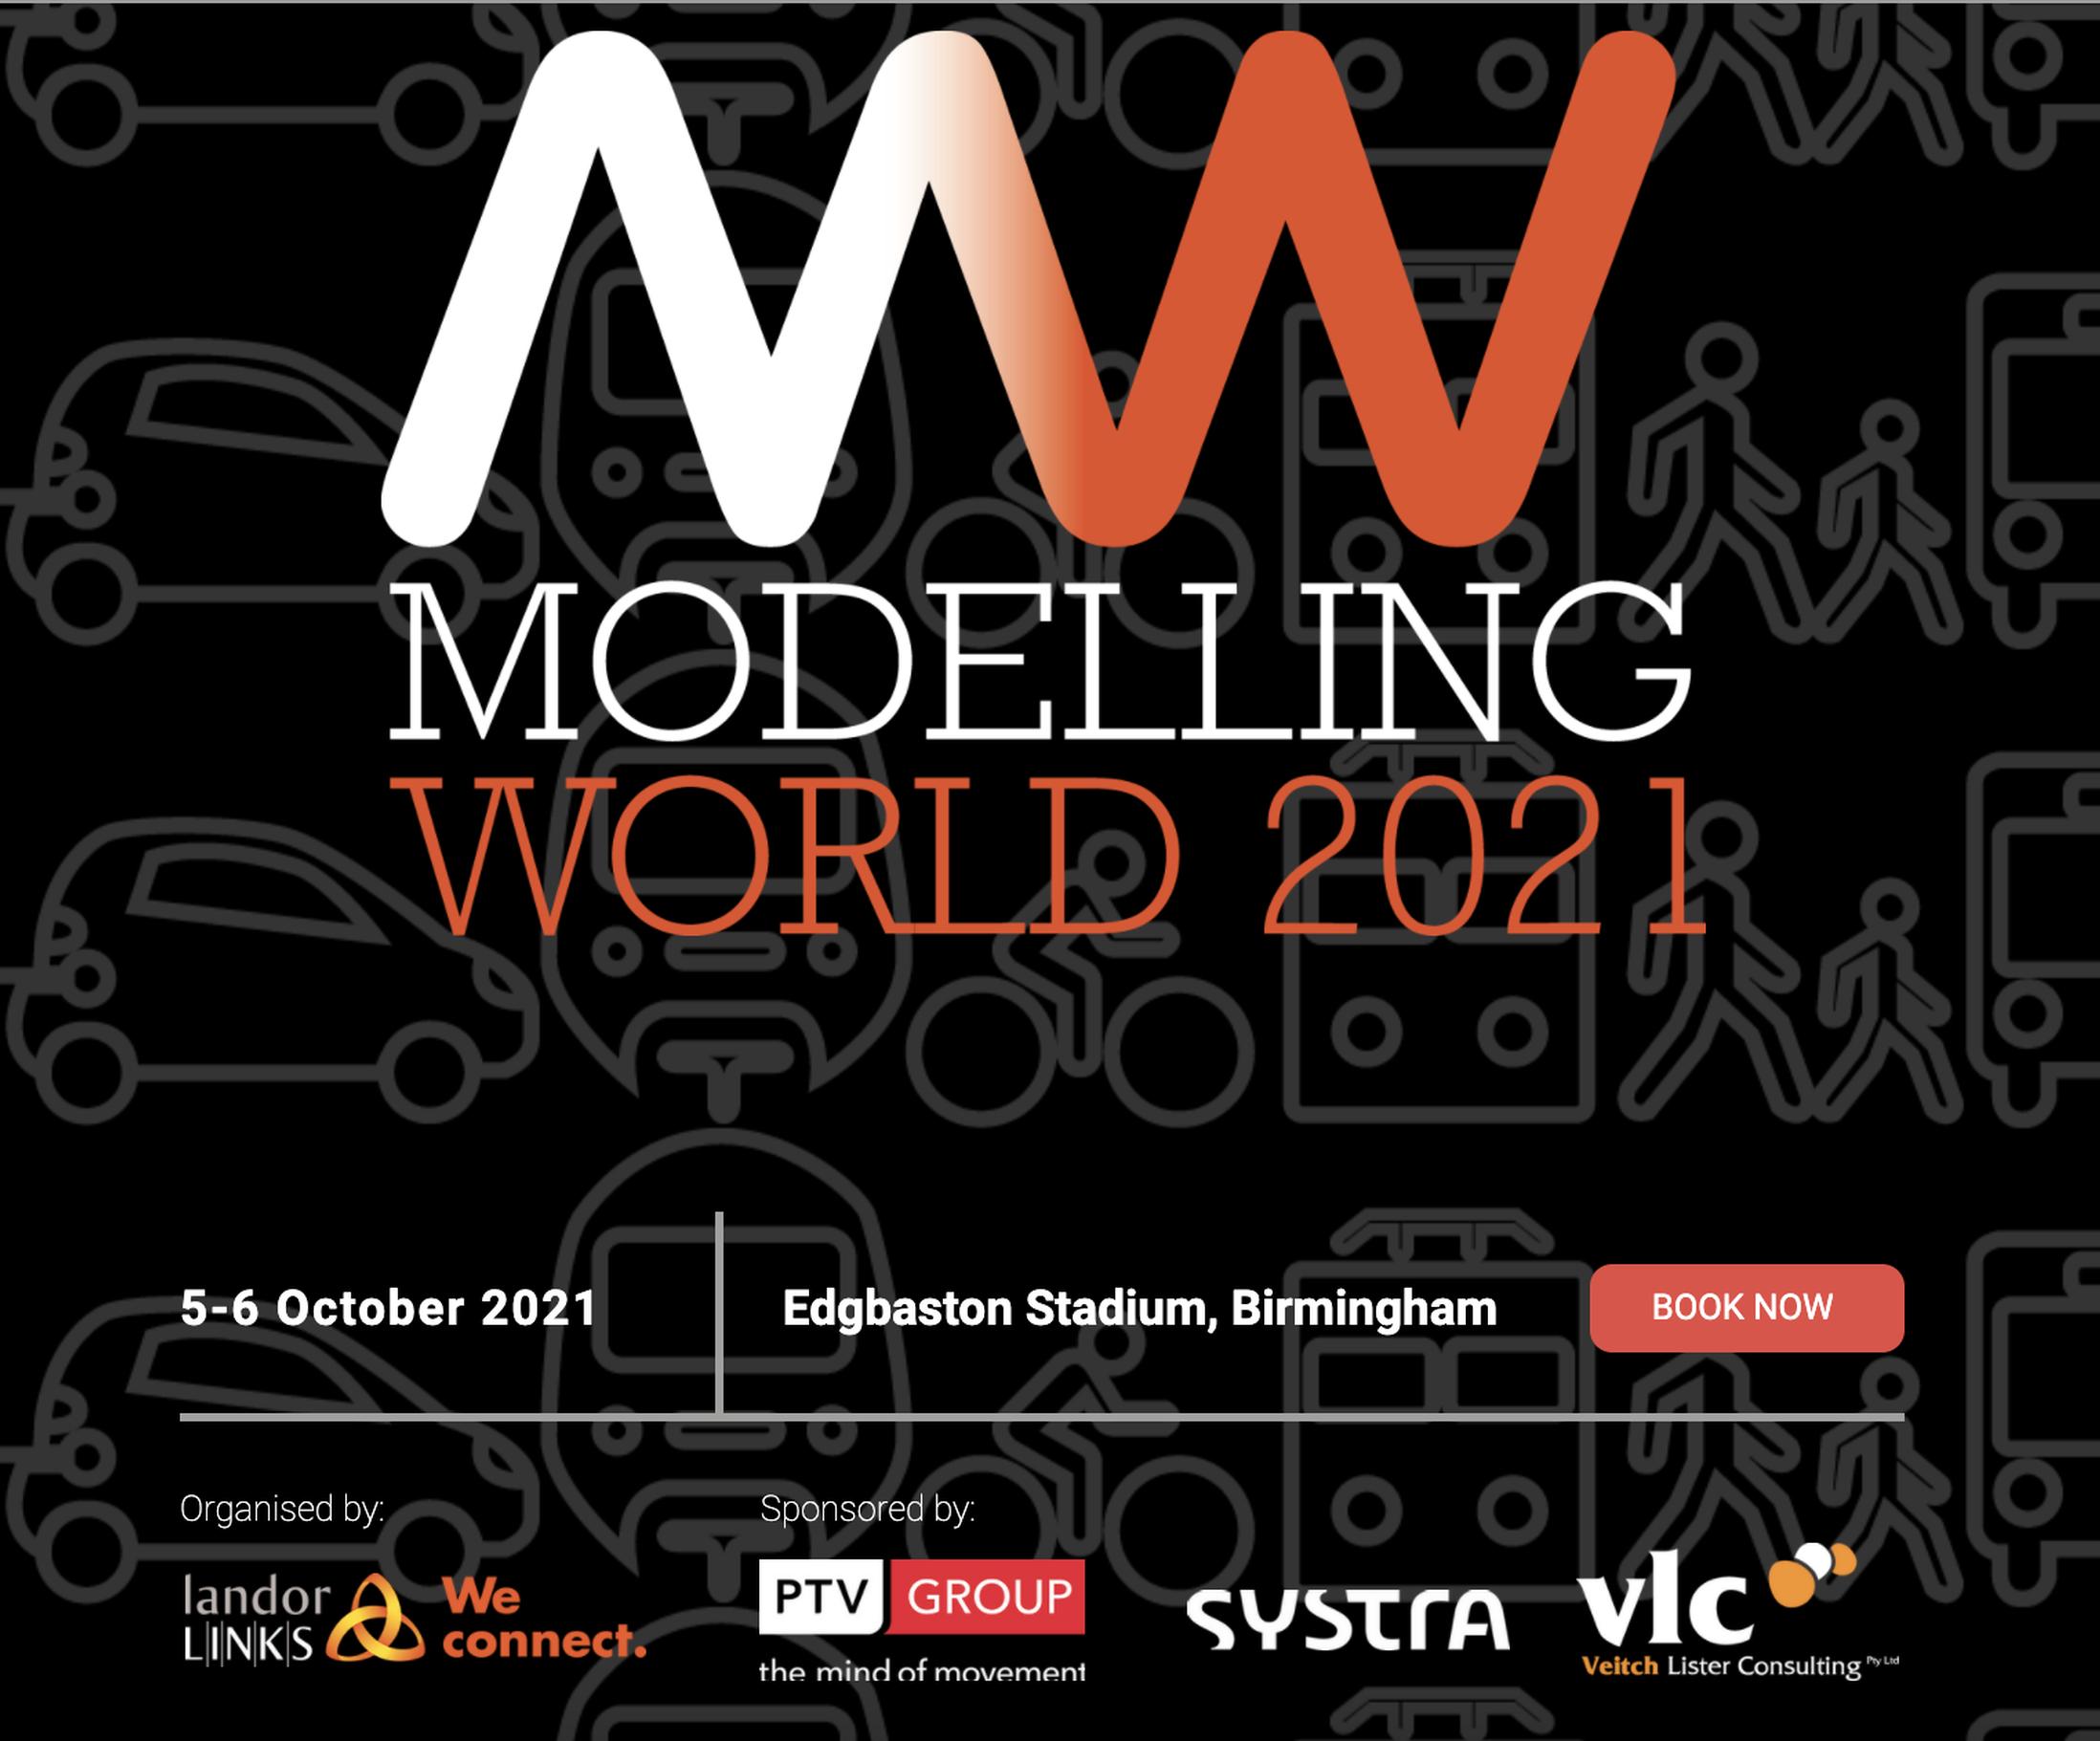 Tom van Vuren is Chair of Modelling World. He is the Regional Director, UK & Europe for Veitch Lister Consulting and a Visiting Professor at the University of Leeds